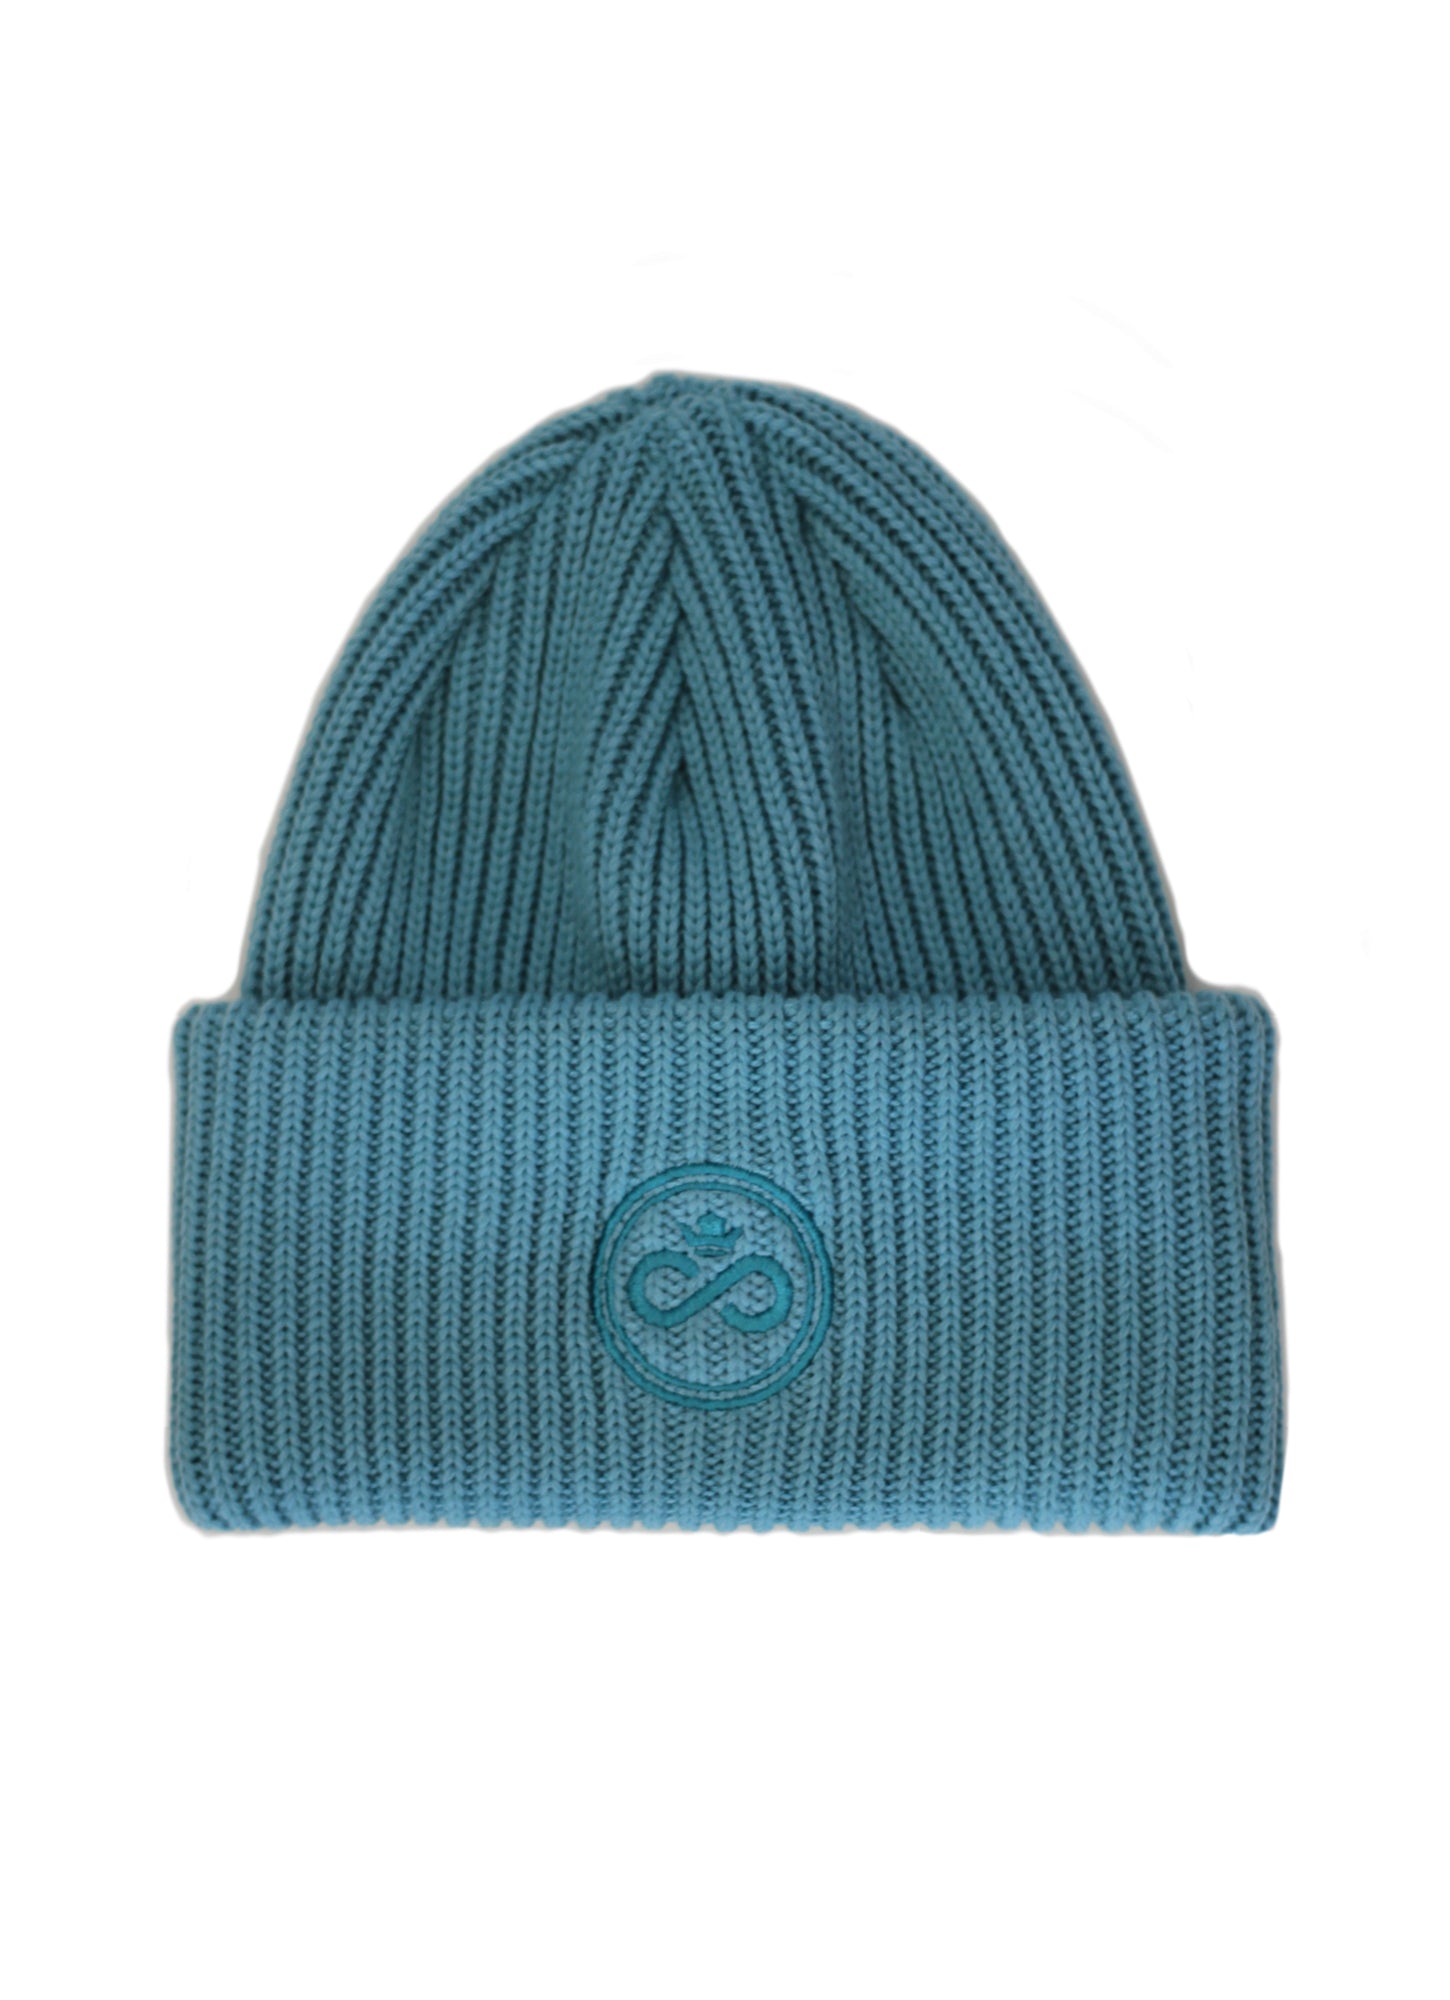 Tuque sarcelle Nomade - taille adulte